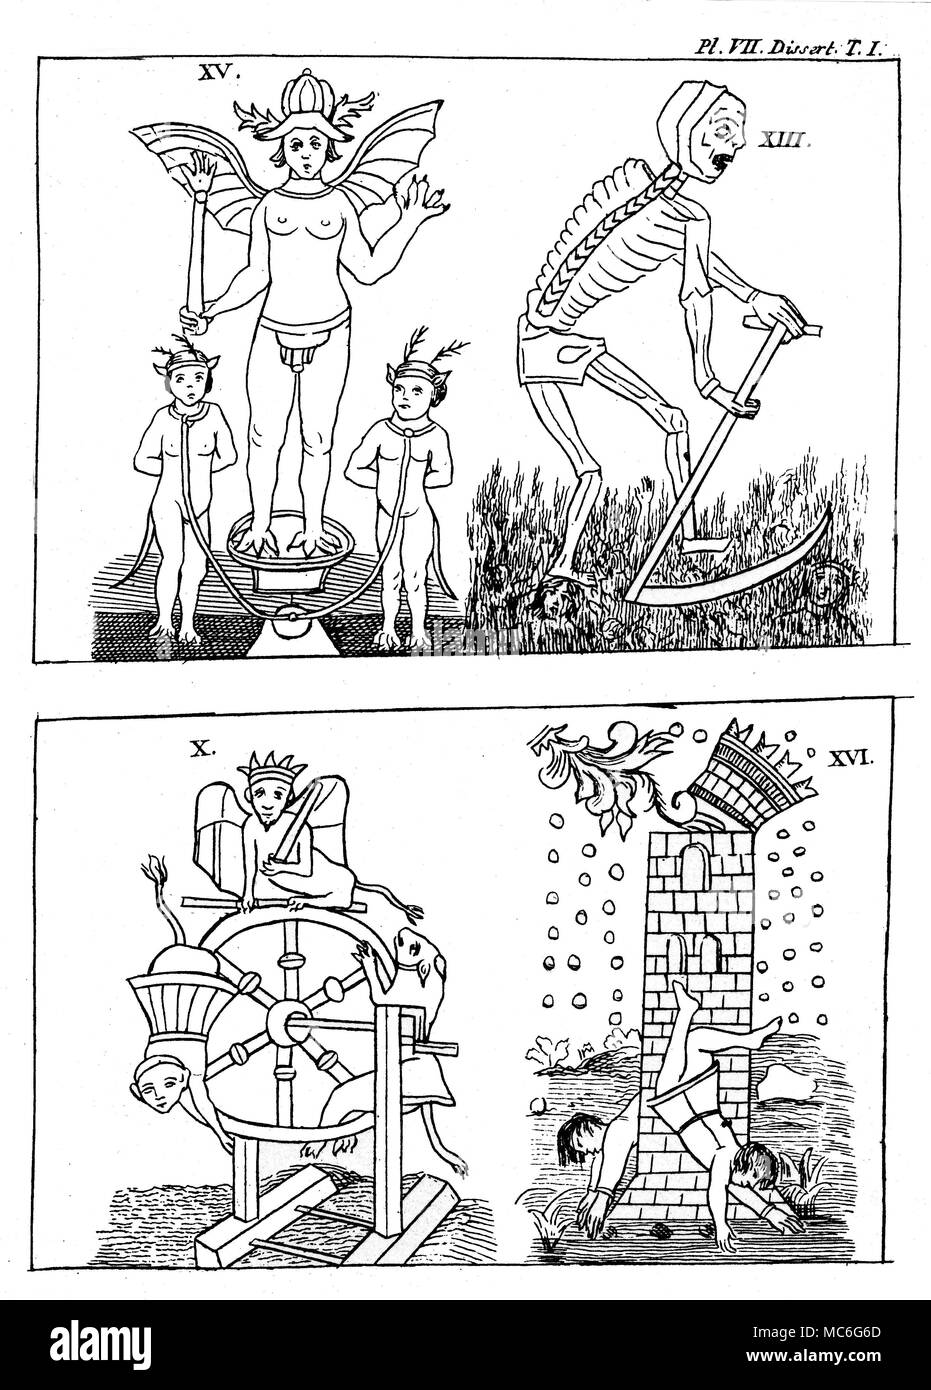 TAROT CARDS - GEBELIN DESIGN - DEVIL - DEATH - WHEEL - TOWER [Top left] The Devil, card 15 of the set pictured by the French Mason, Court de Gebelin, in 1773, based on the Marseille decks he had seen. Gebelin identified the card with Typhon, the Greek equivalent of the Egyptian god of darkness, Set. See Court de Gebelin, Le Monde primitive, Vols. III [1773] and VIII [1781]. [Top right] the Death card, number 13 of the Gebelin design. [Bottom left] The Wheel of Fortune, card 10 of the Gebelin design. [Bottom right] The House of God, card 16, of the Gebelin design, which he uniquely i Stock Photo